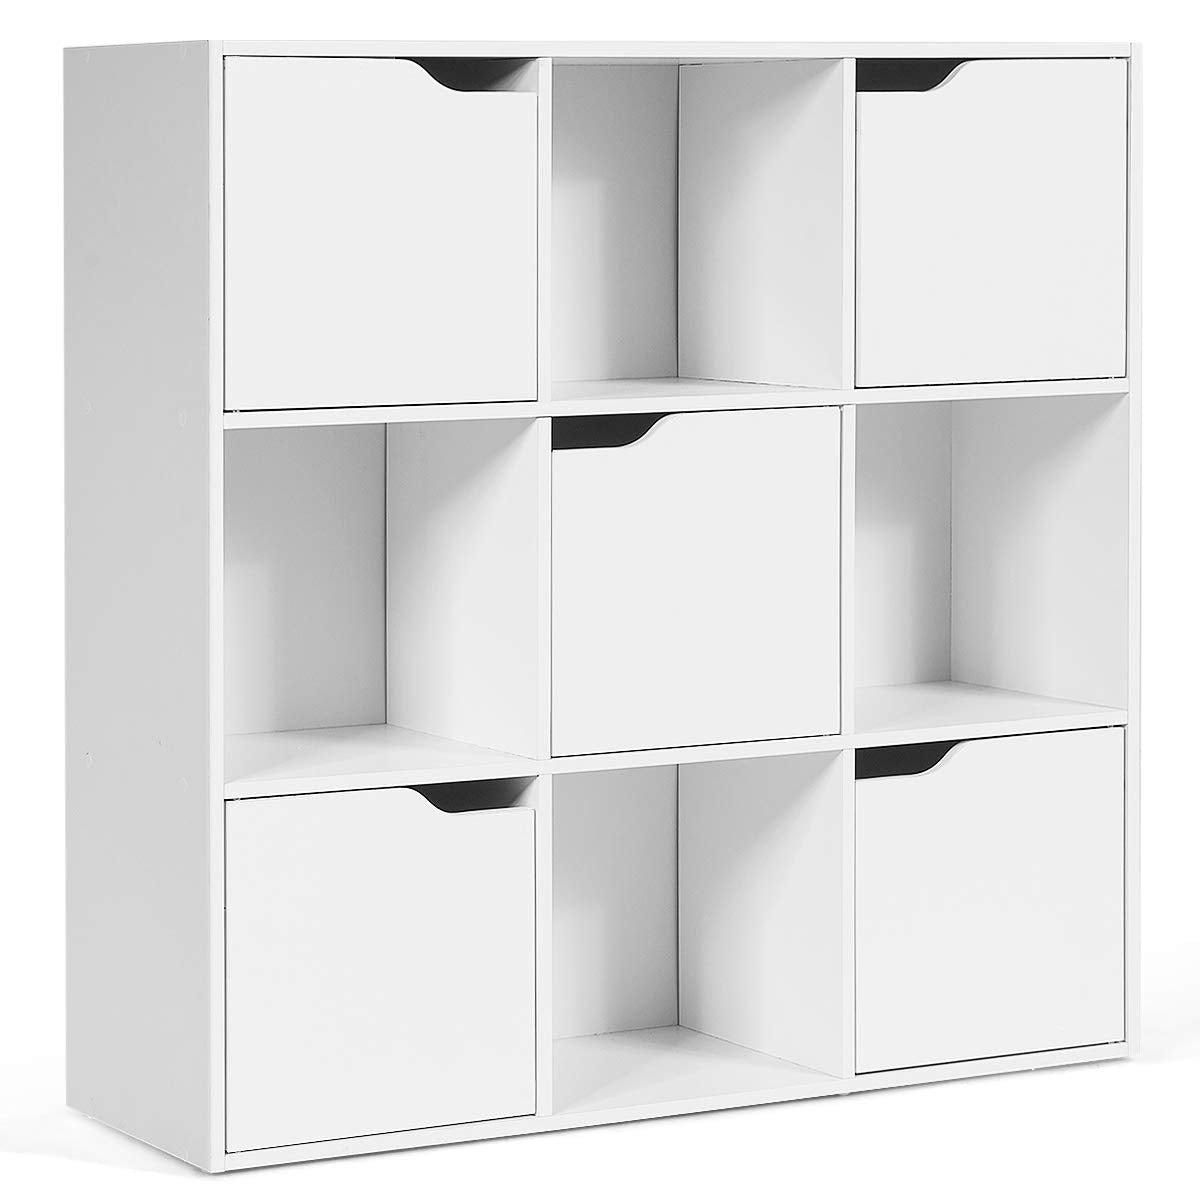 Giantex 9-Cube Storage Organizer, Storage Cabinet with 4 Open Cubes and 5 Cabinets